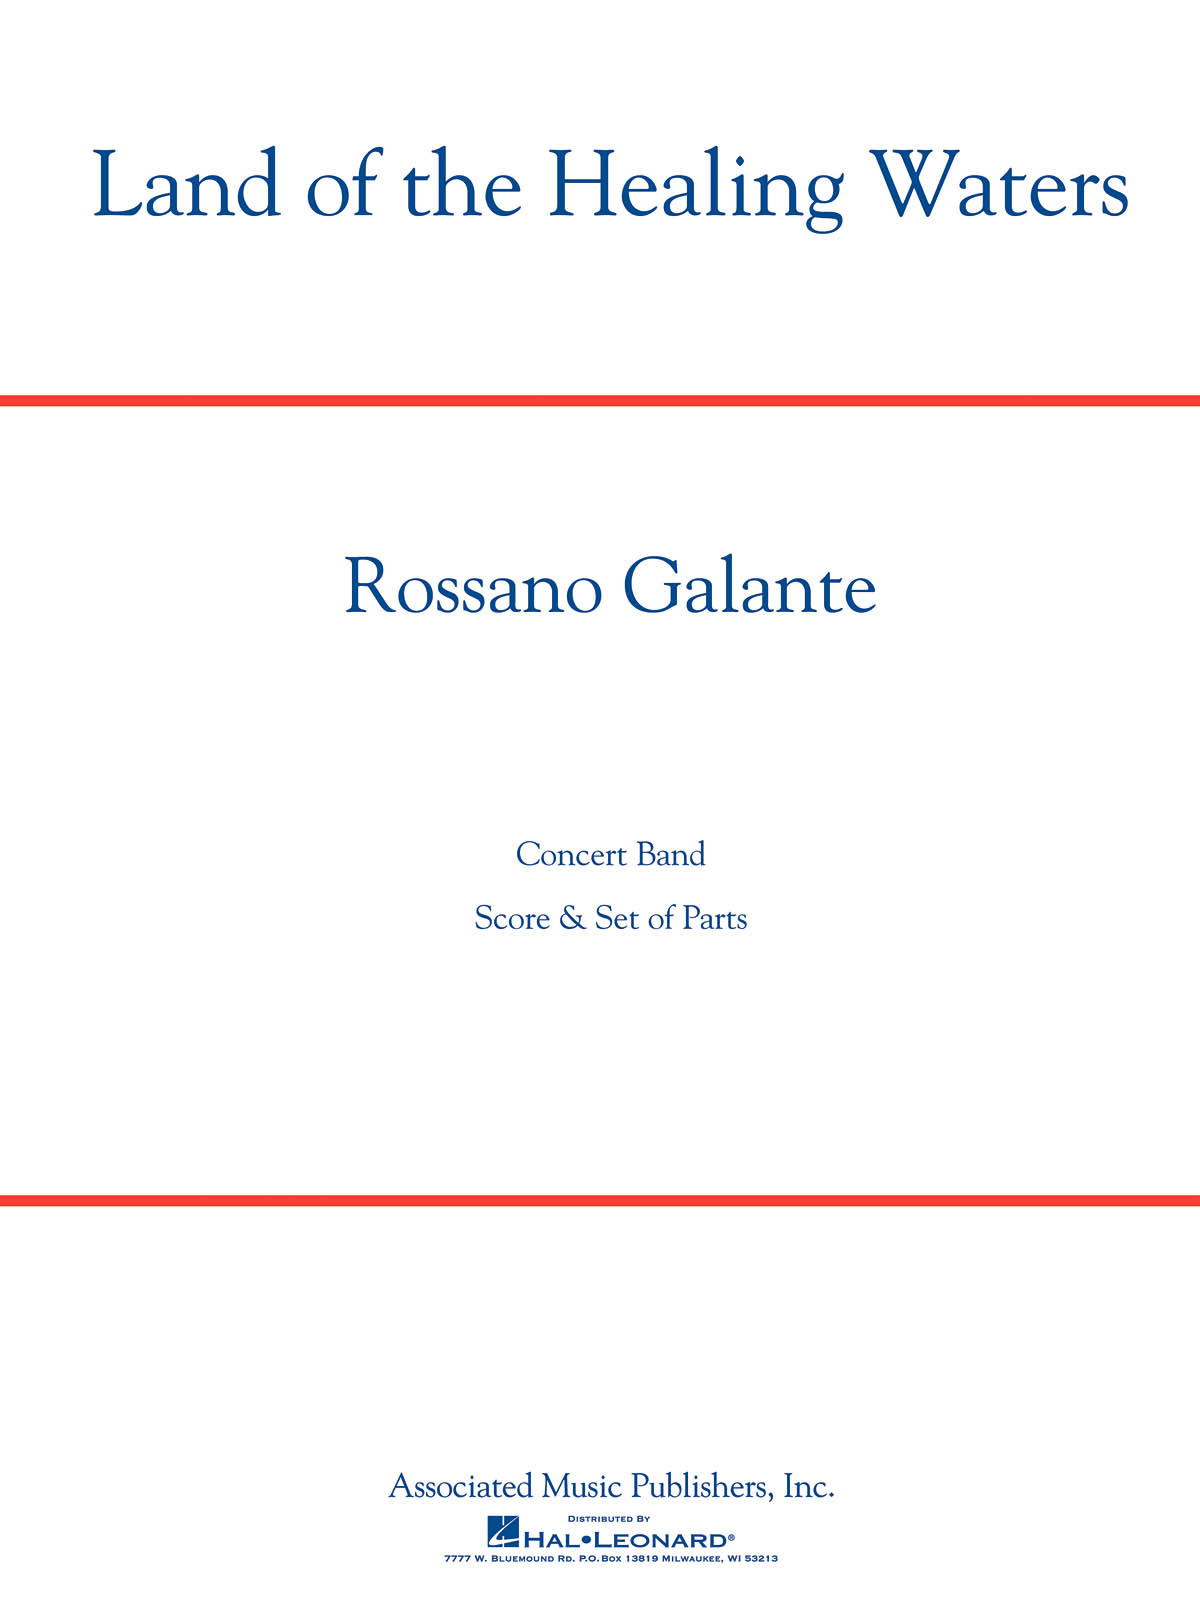 Rossano Galante: Land of the Healing Waters: Concert Band: Score